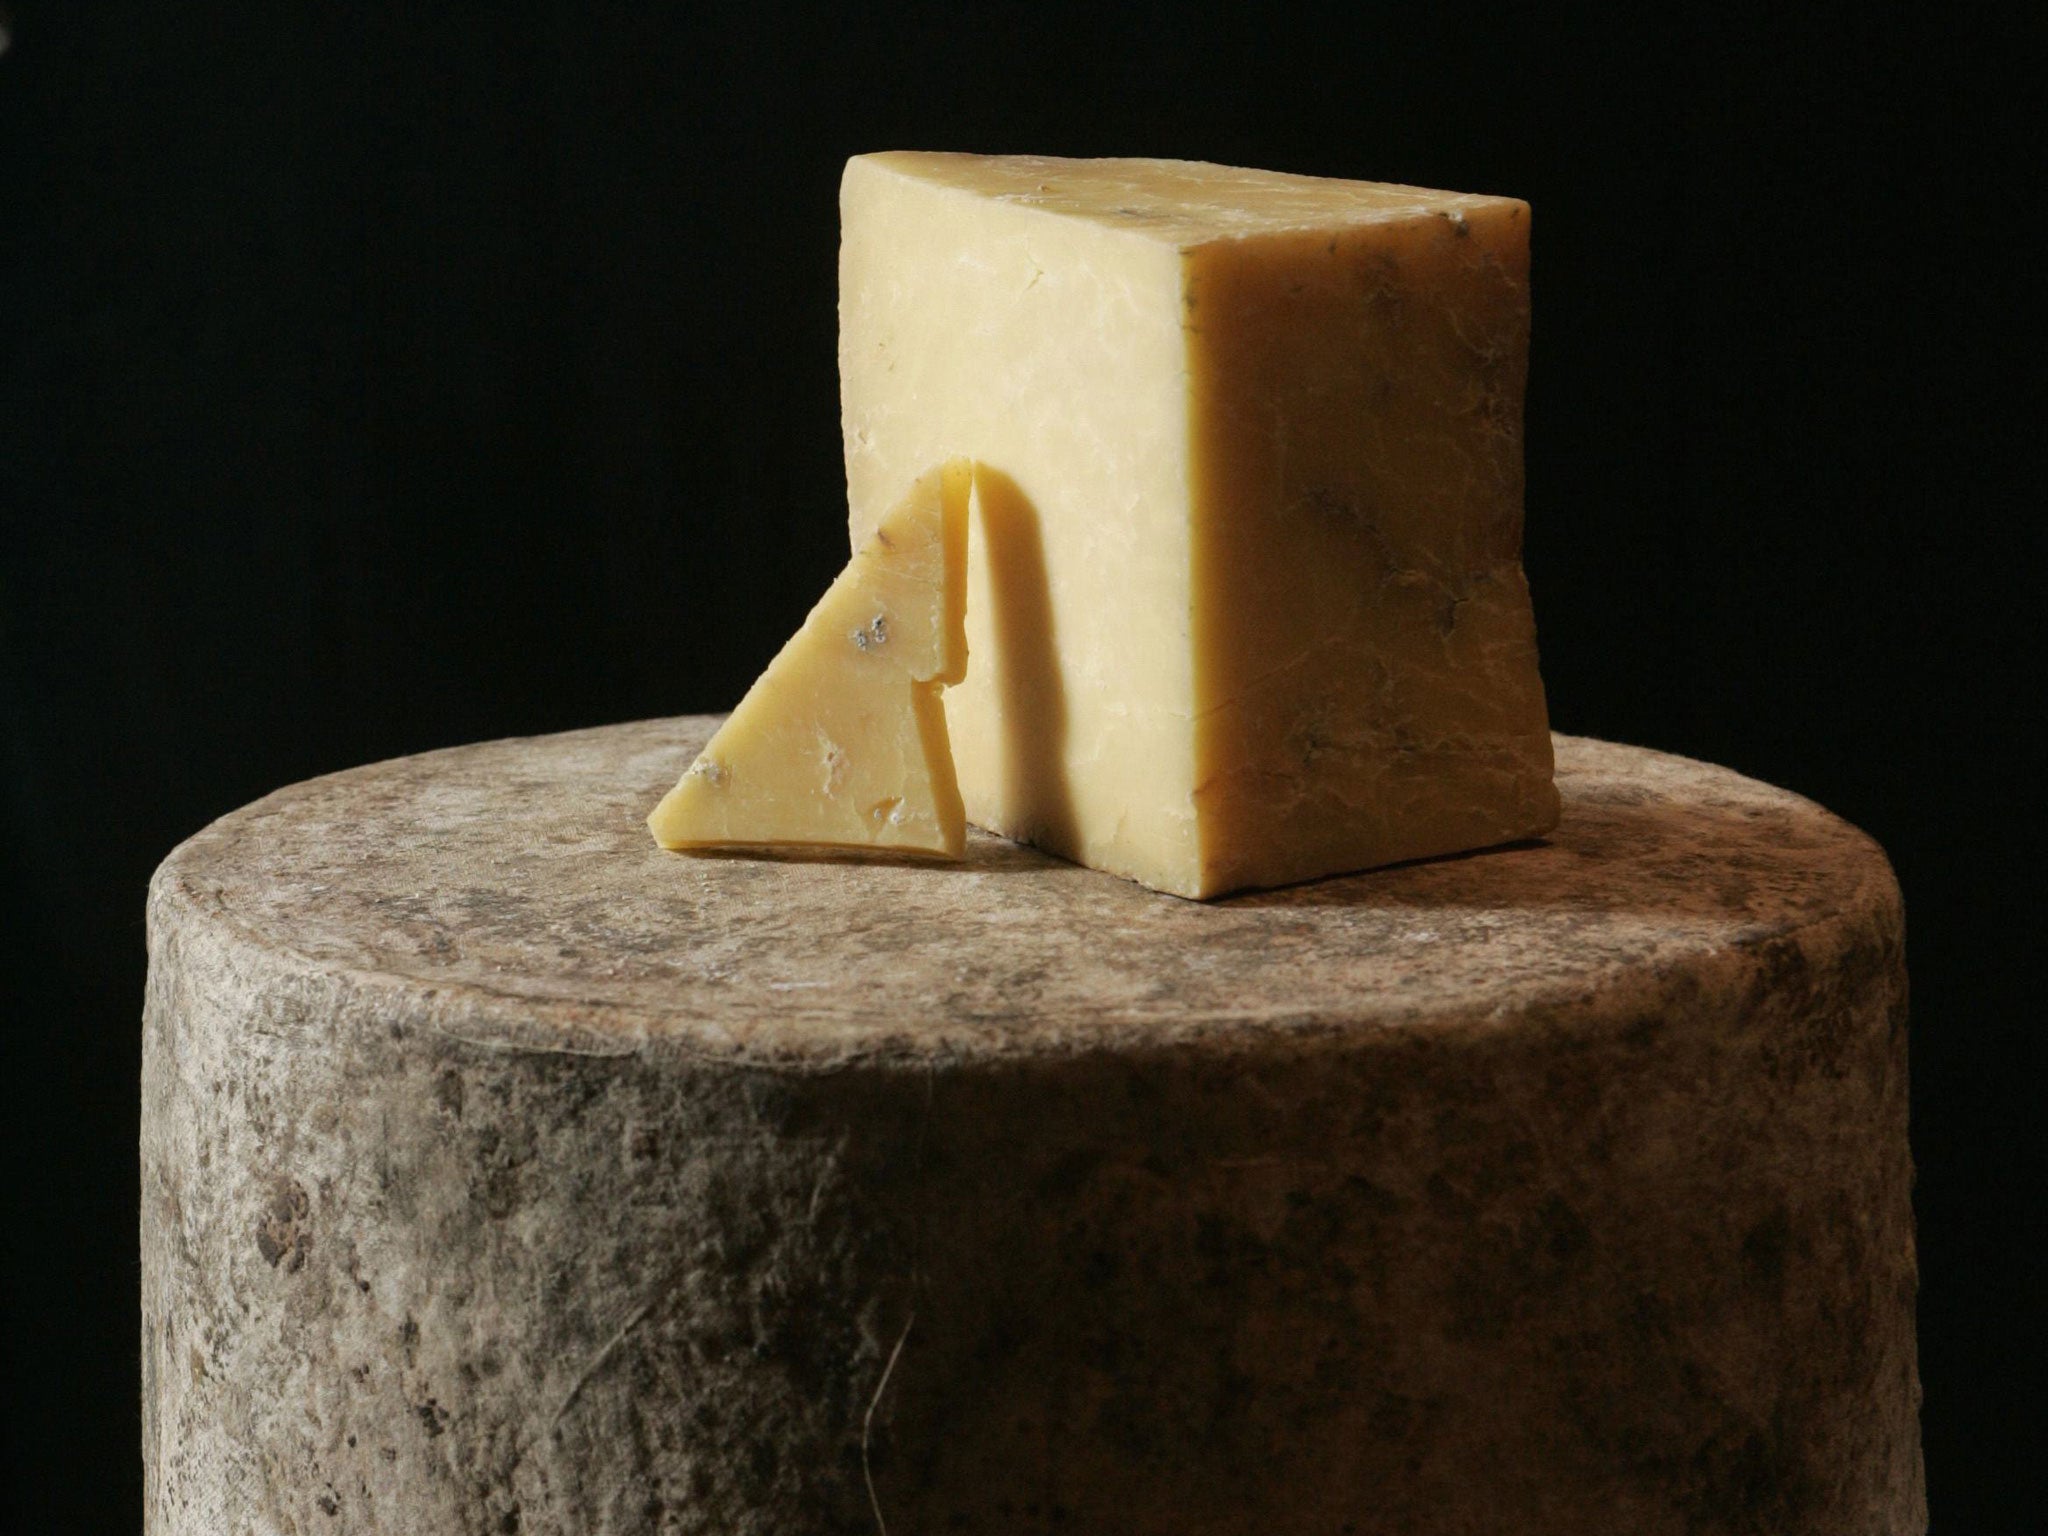 One of Britain's best-known cheddar makers has ceased production